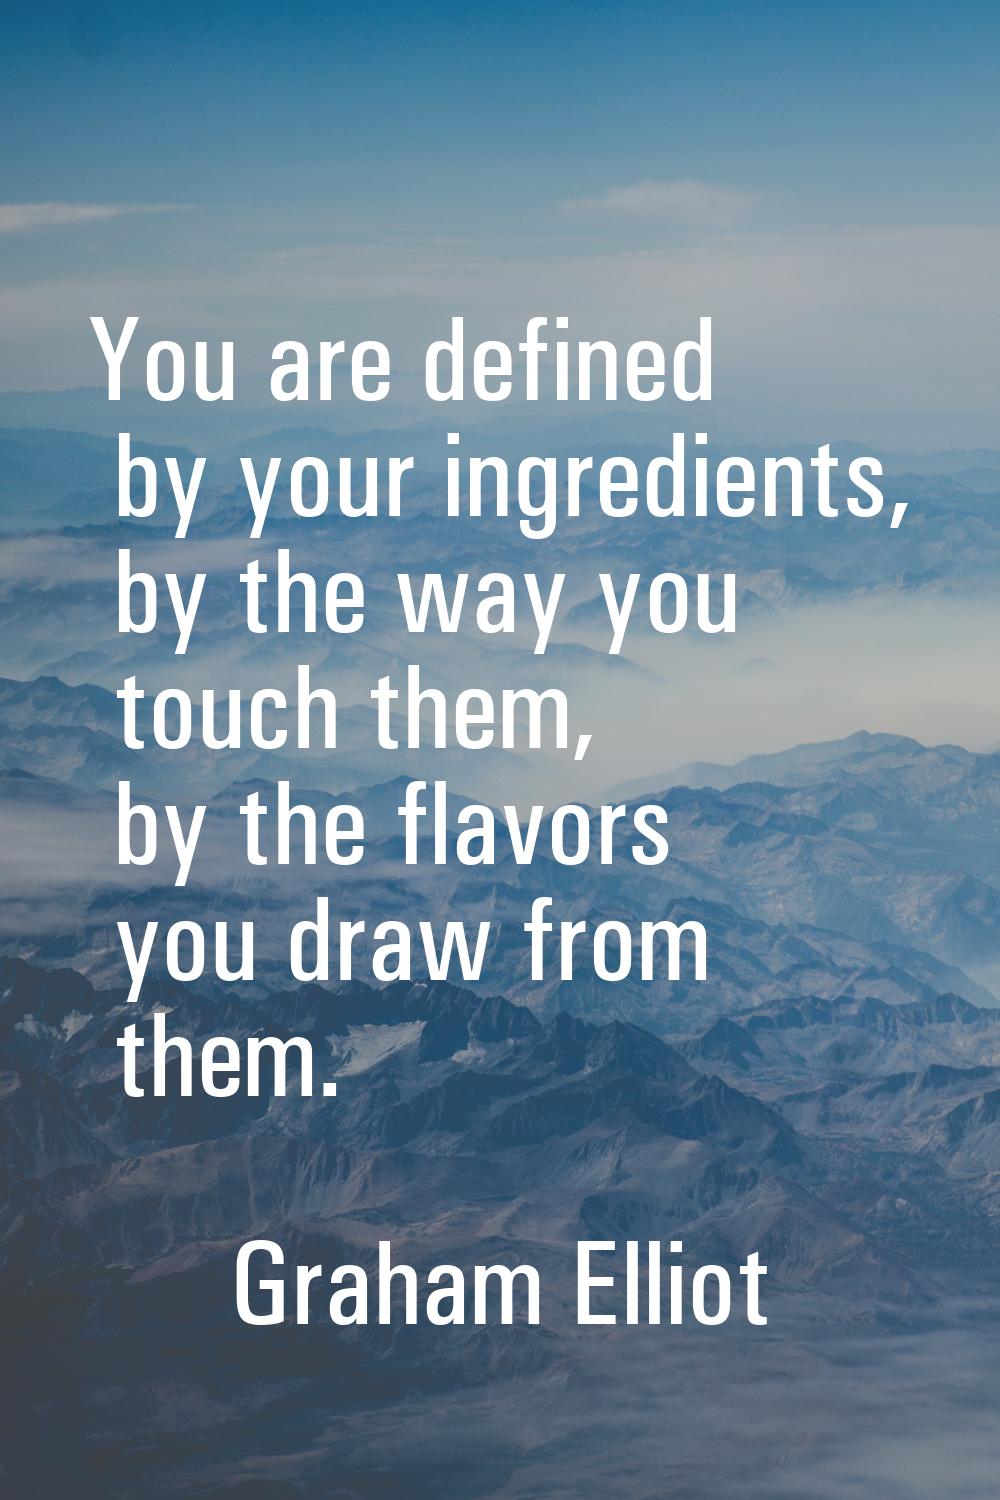 You are defined by your ingredients, by the way you touch them, by the flavors you draw from them.